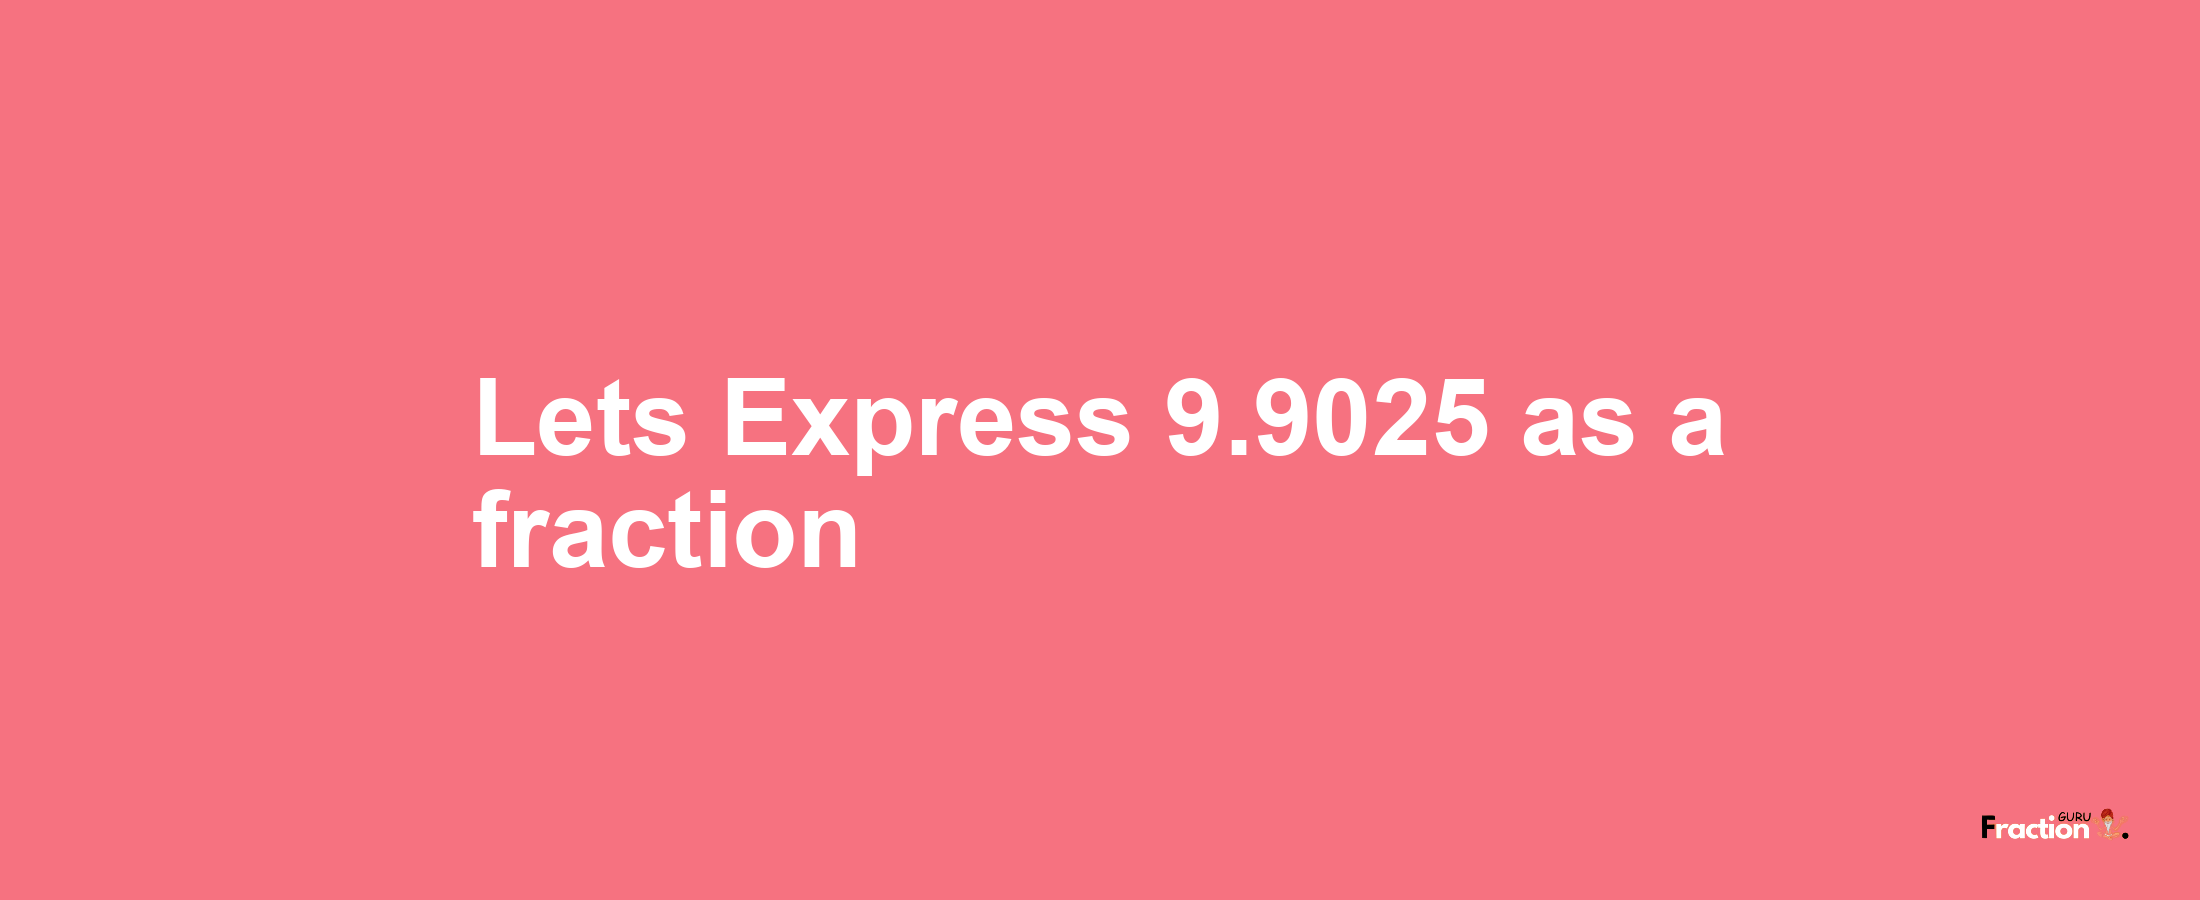 Lets Express 9.9025 as afraction